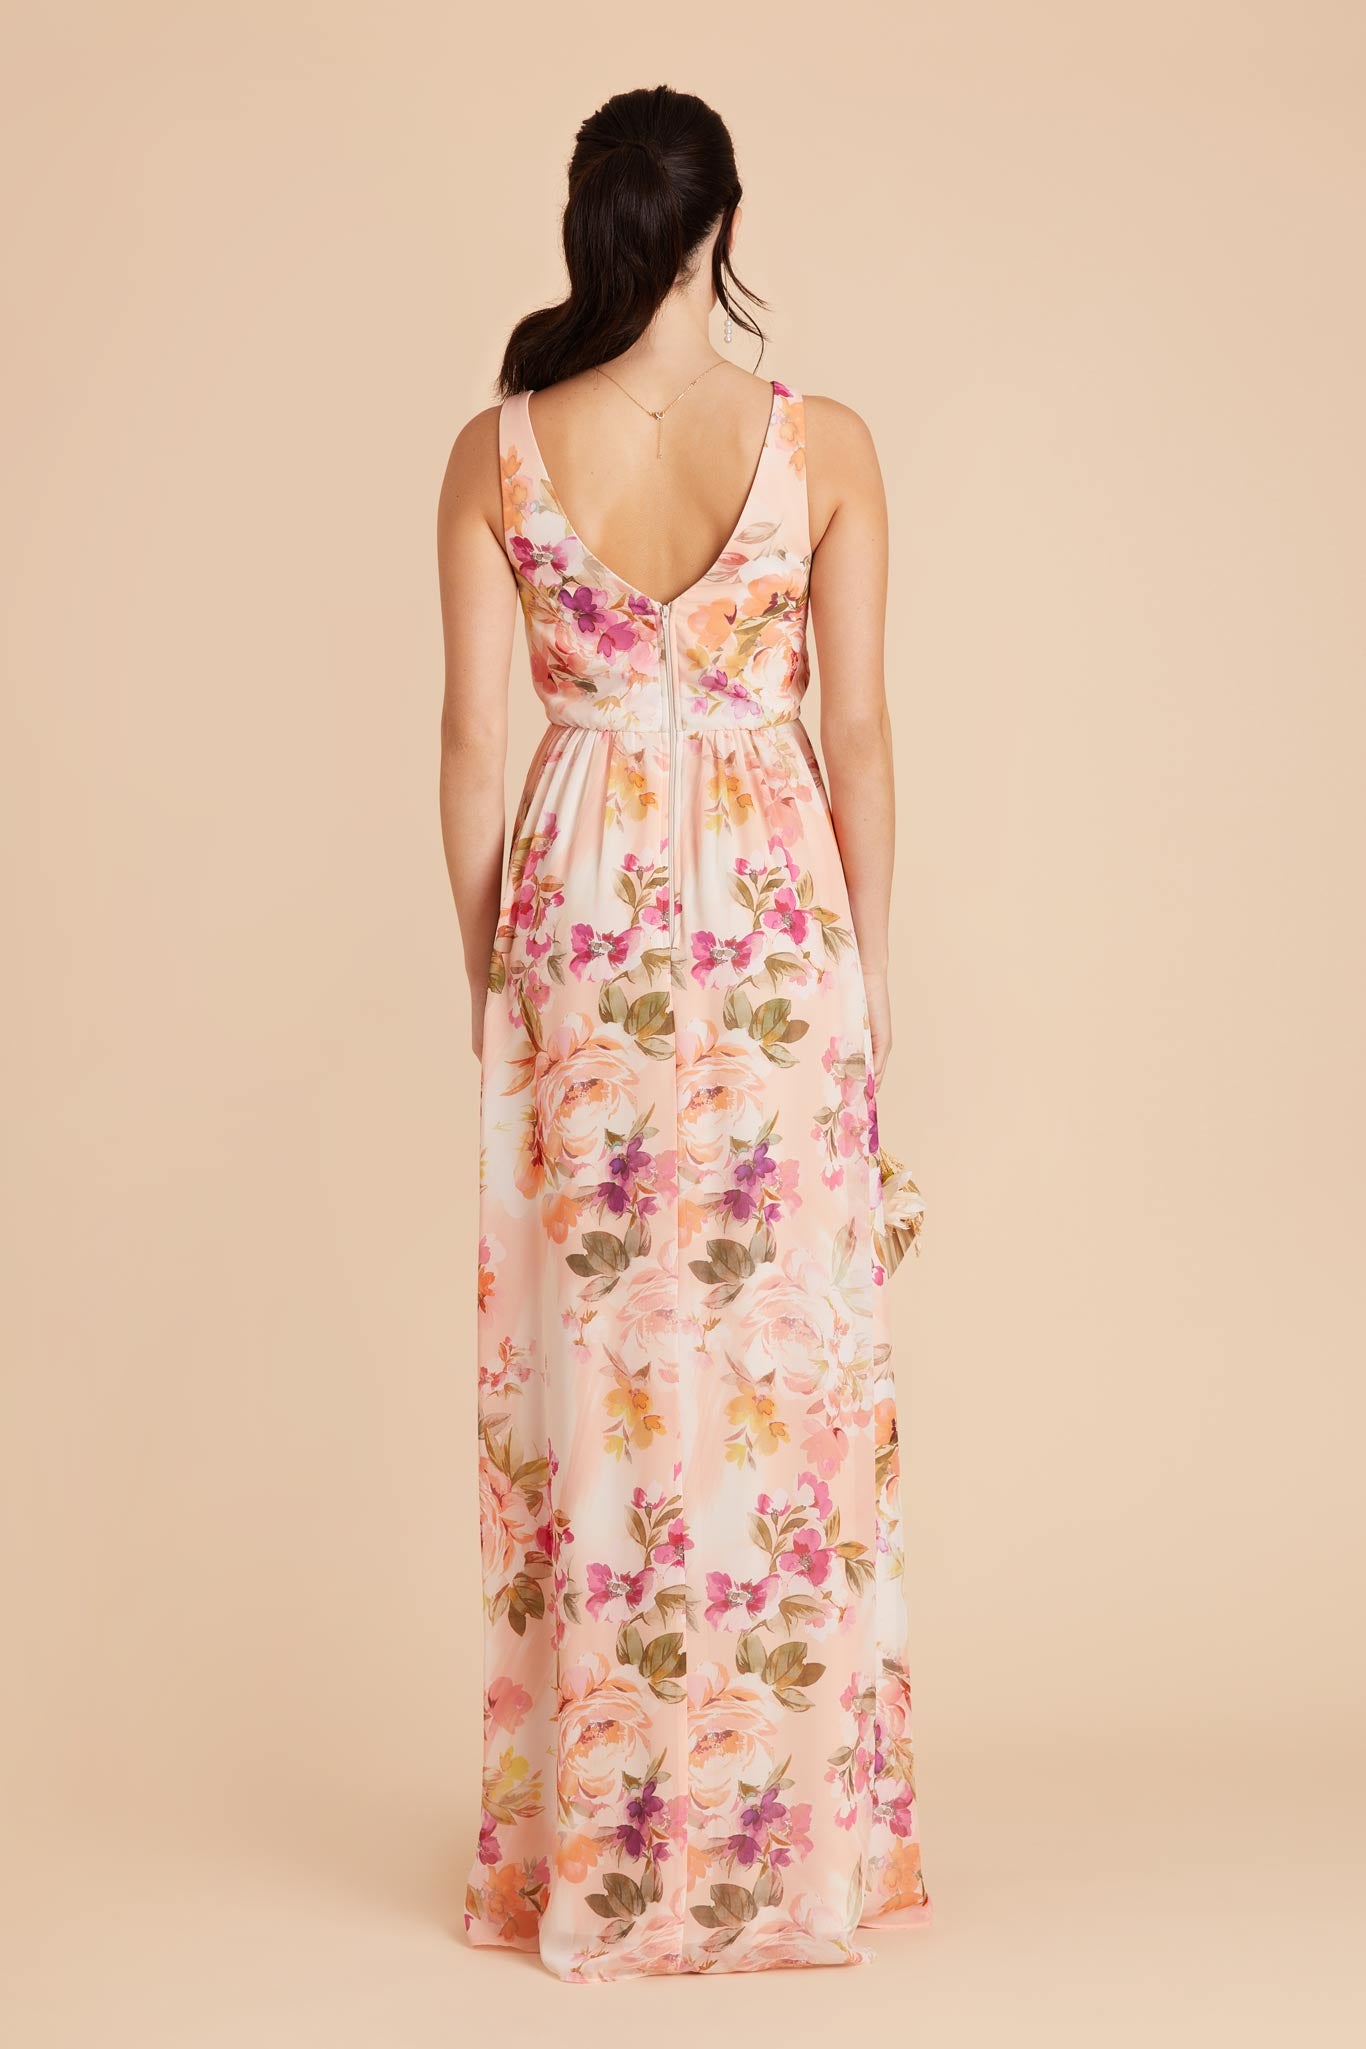 Coral Sunset Peonies Laurie Empire Dress by Birdy Grey